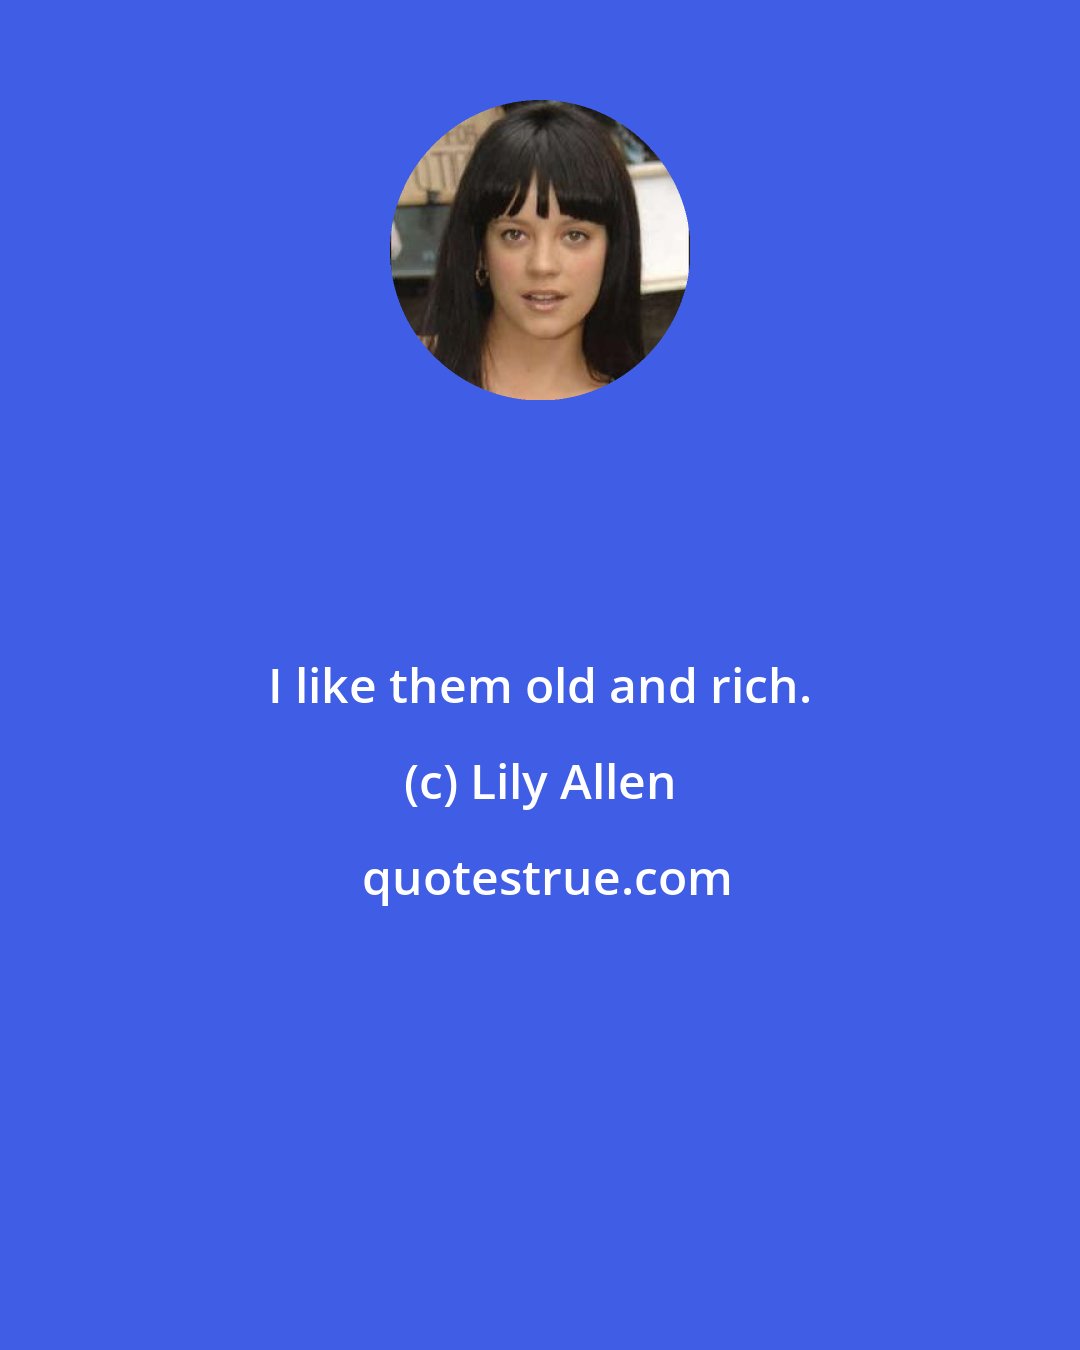 Lily Allen: I like them old and rich.